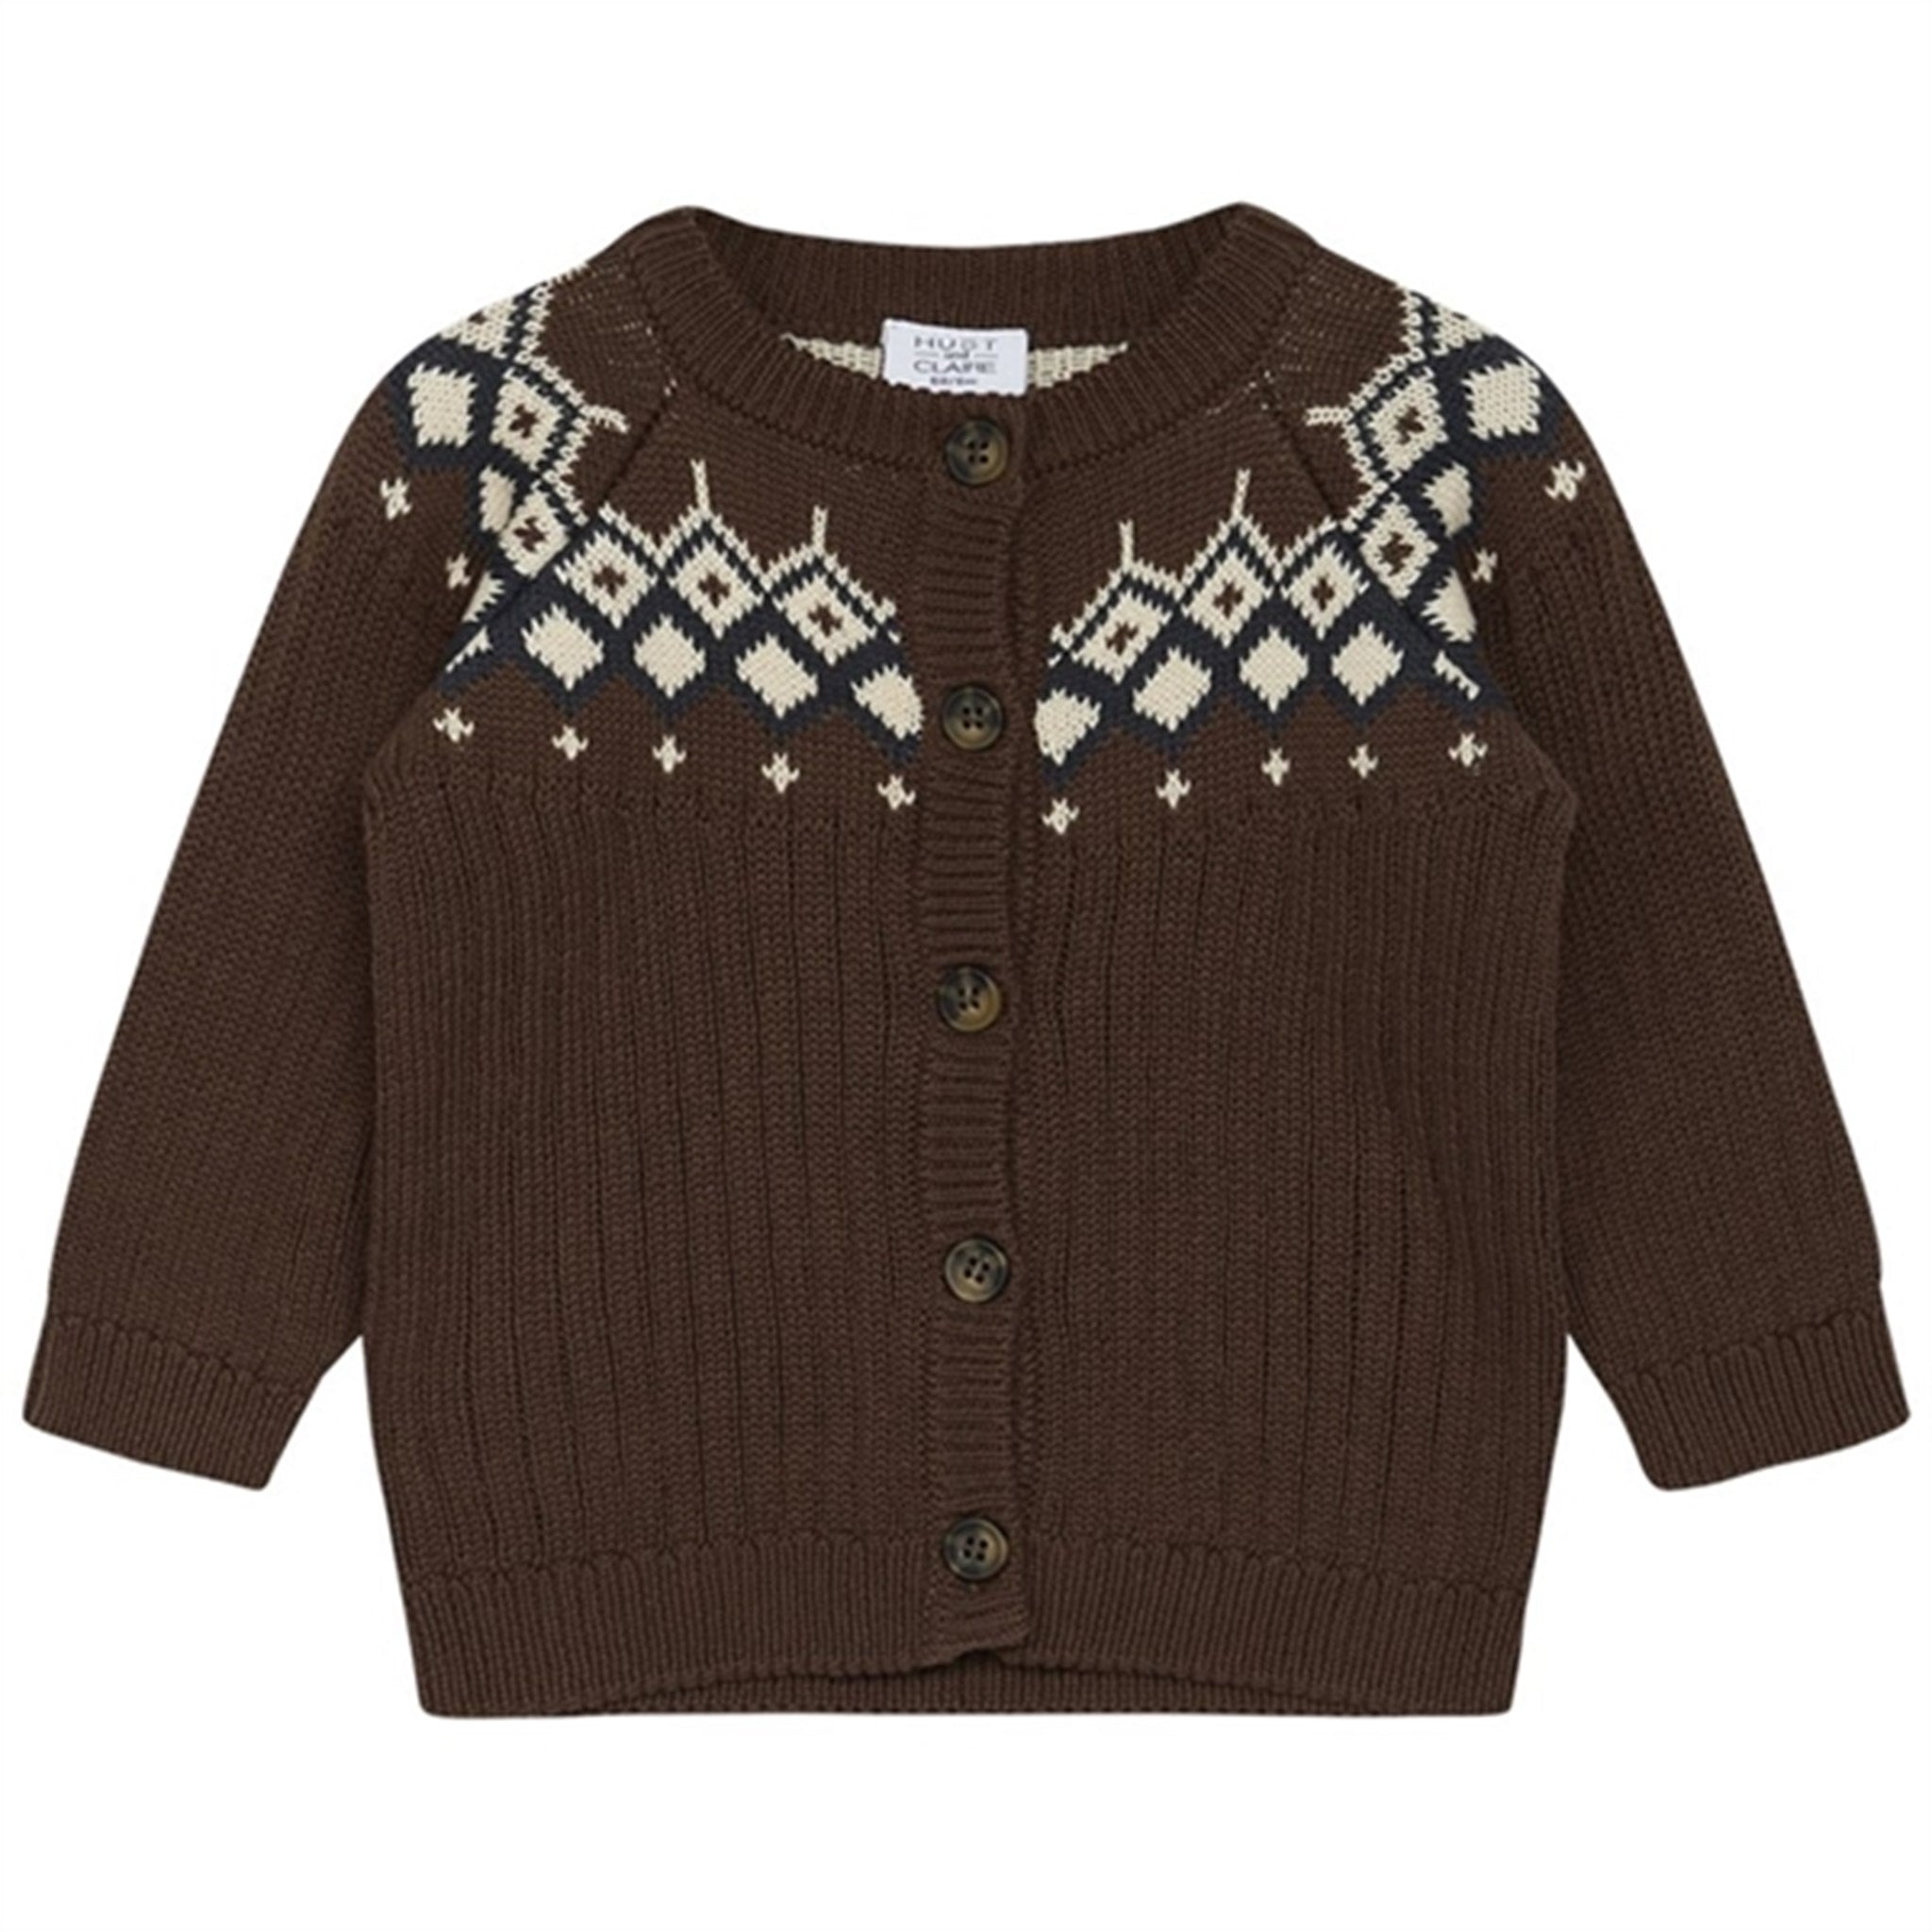 Hust & Claire Baby Chestnut Christoffer Cardigan